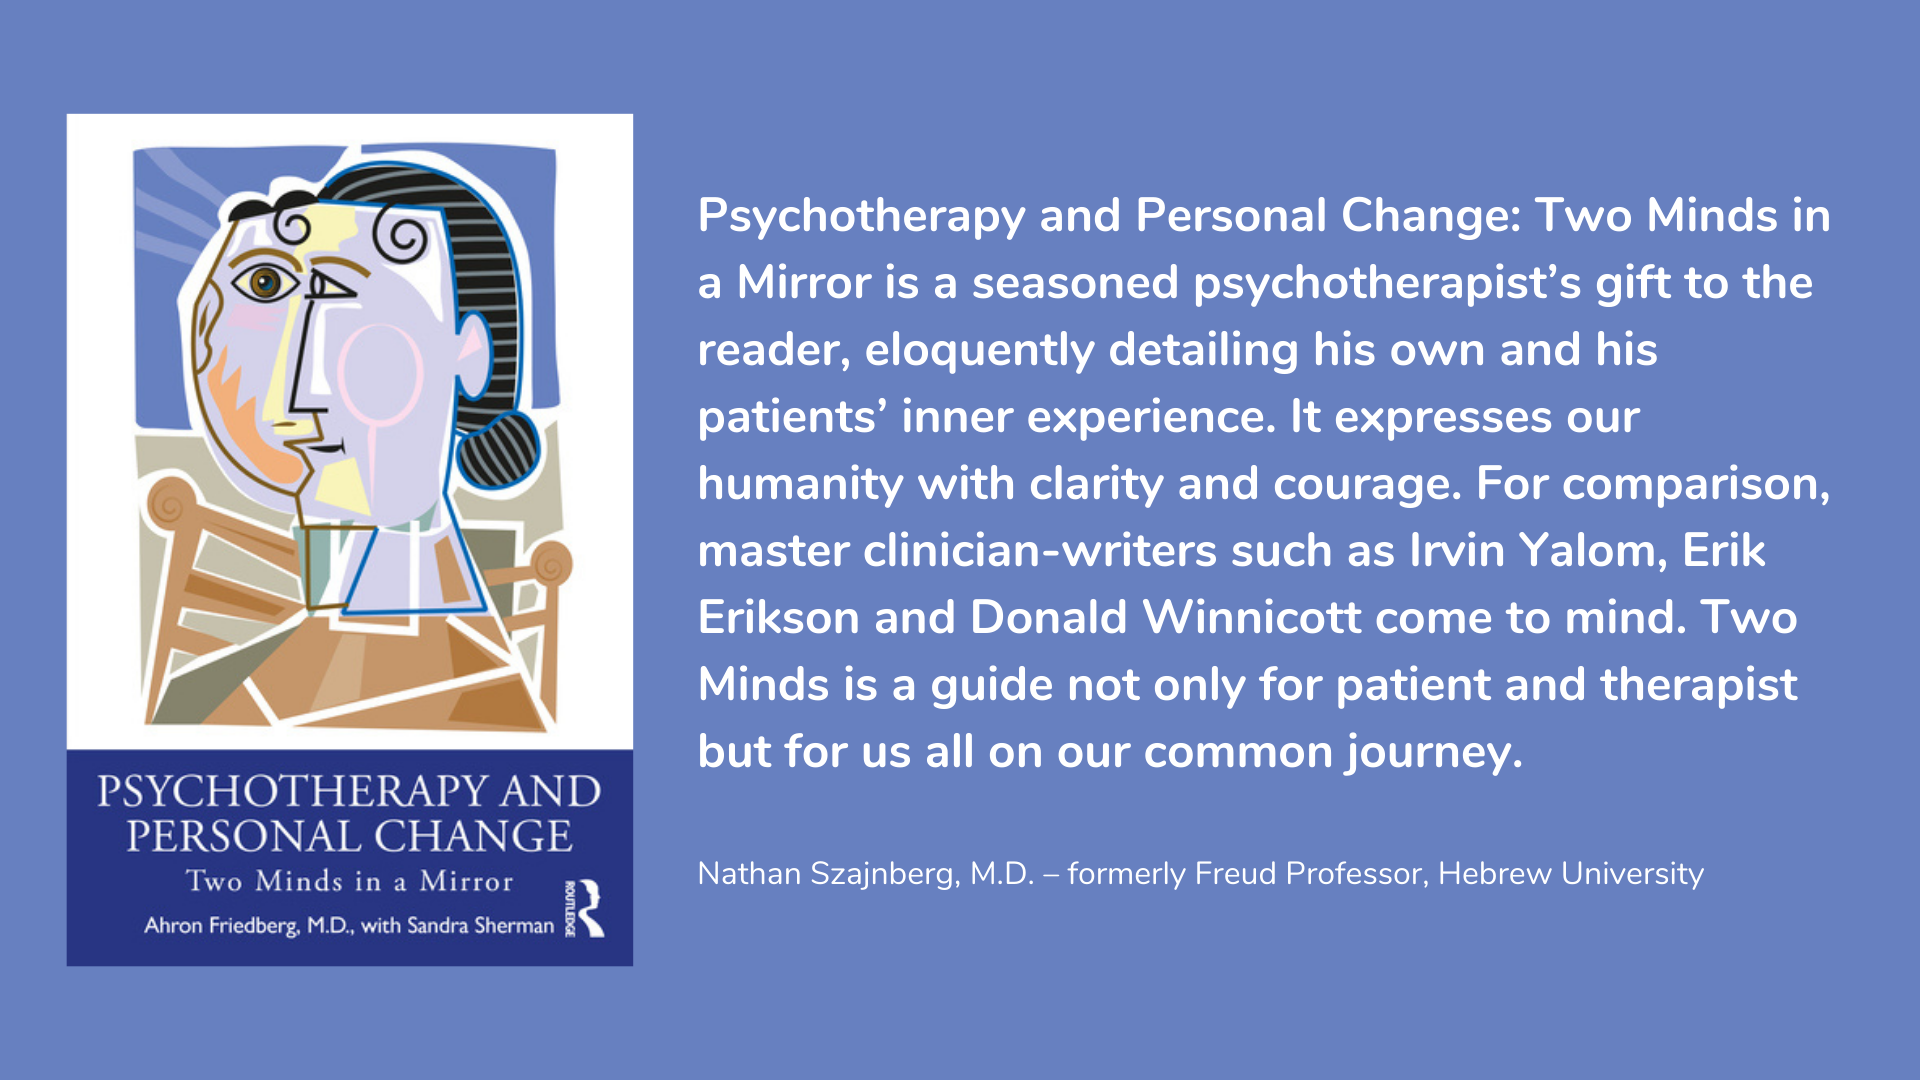 Psychotherapy and Personal Change: Two Minds in a Mirror by Ahron Friedberg, M.D.